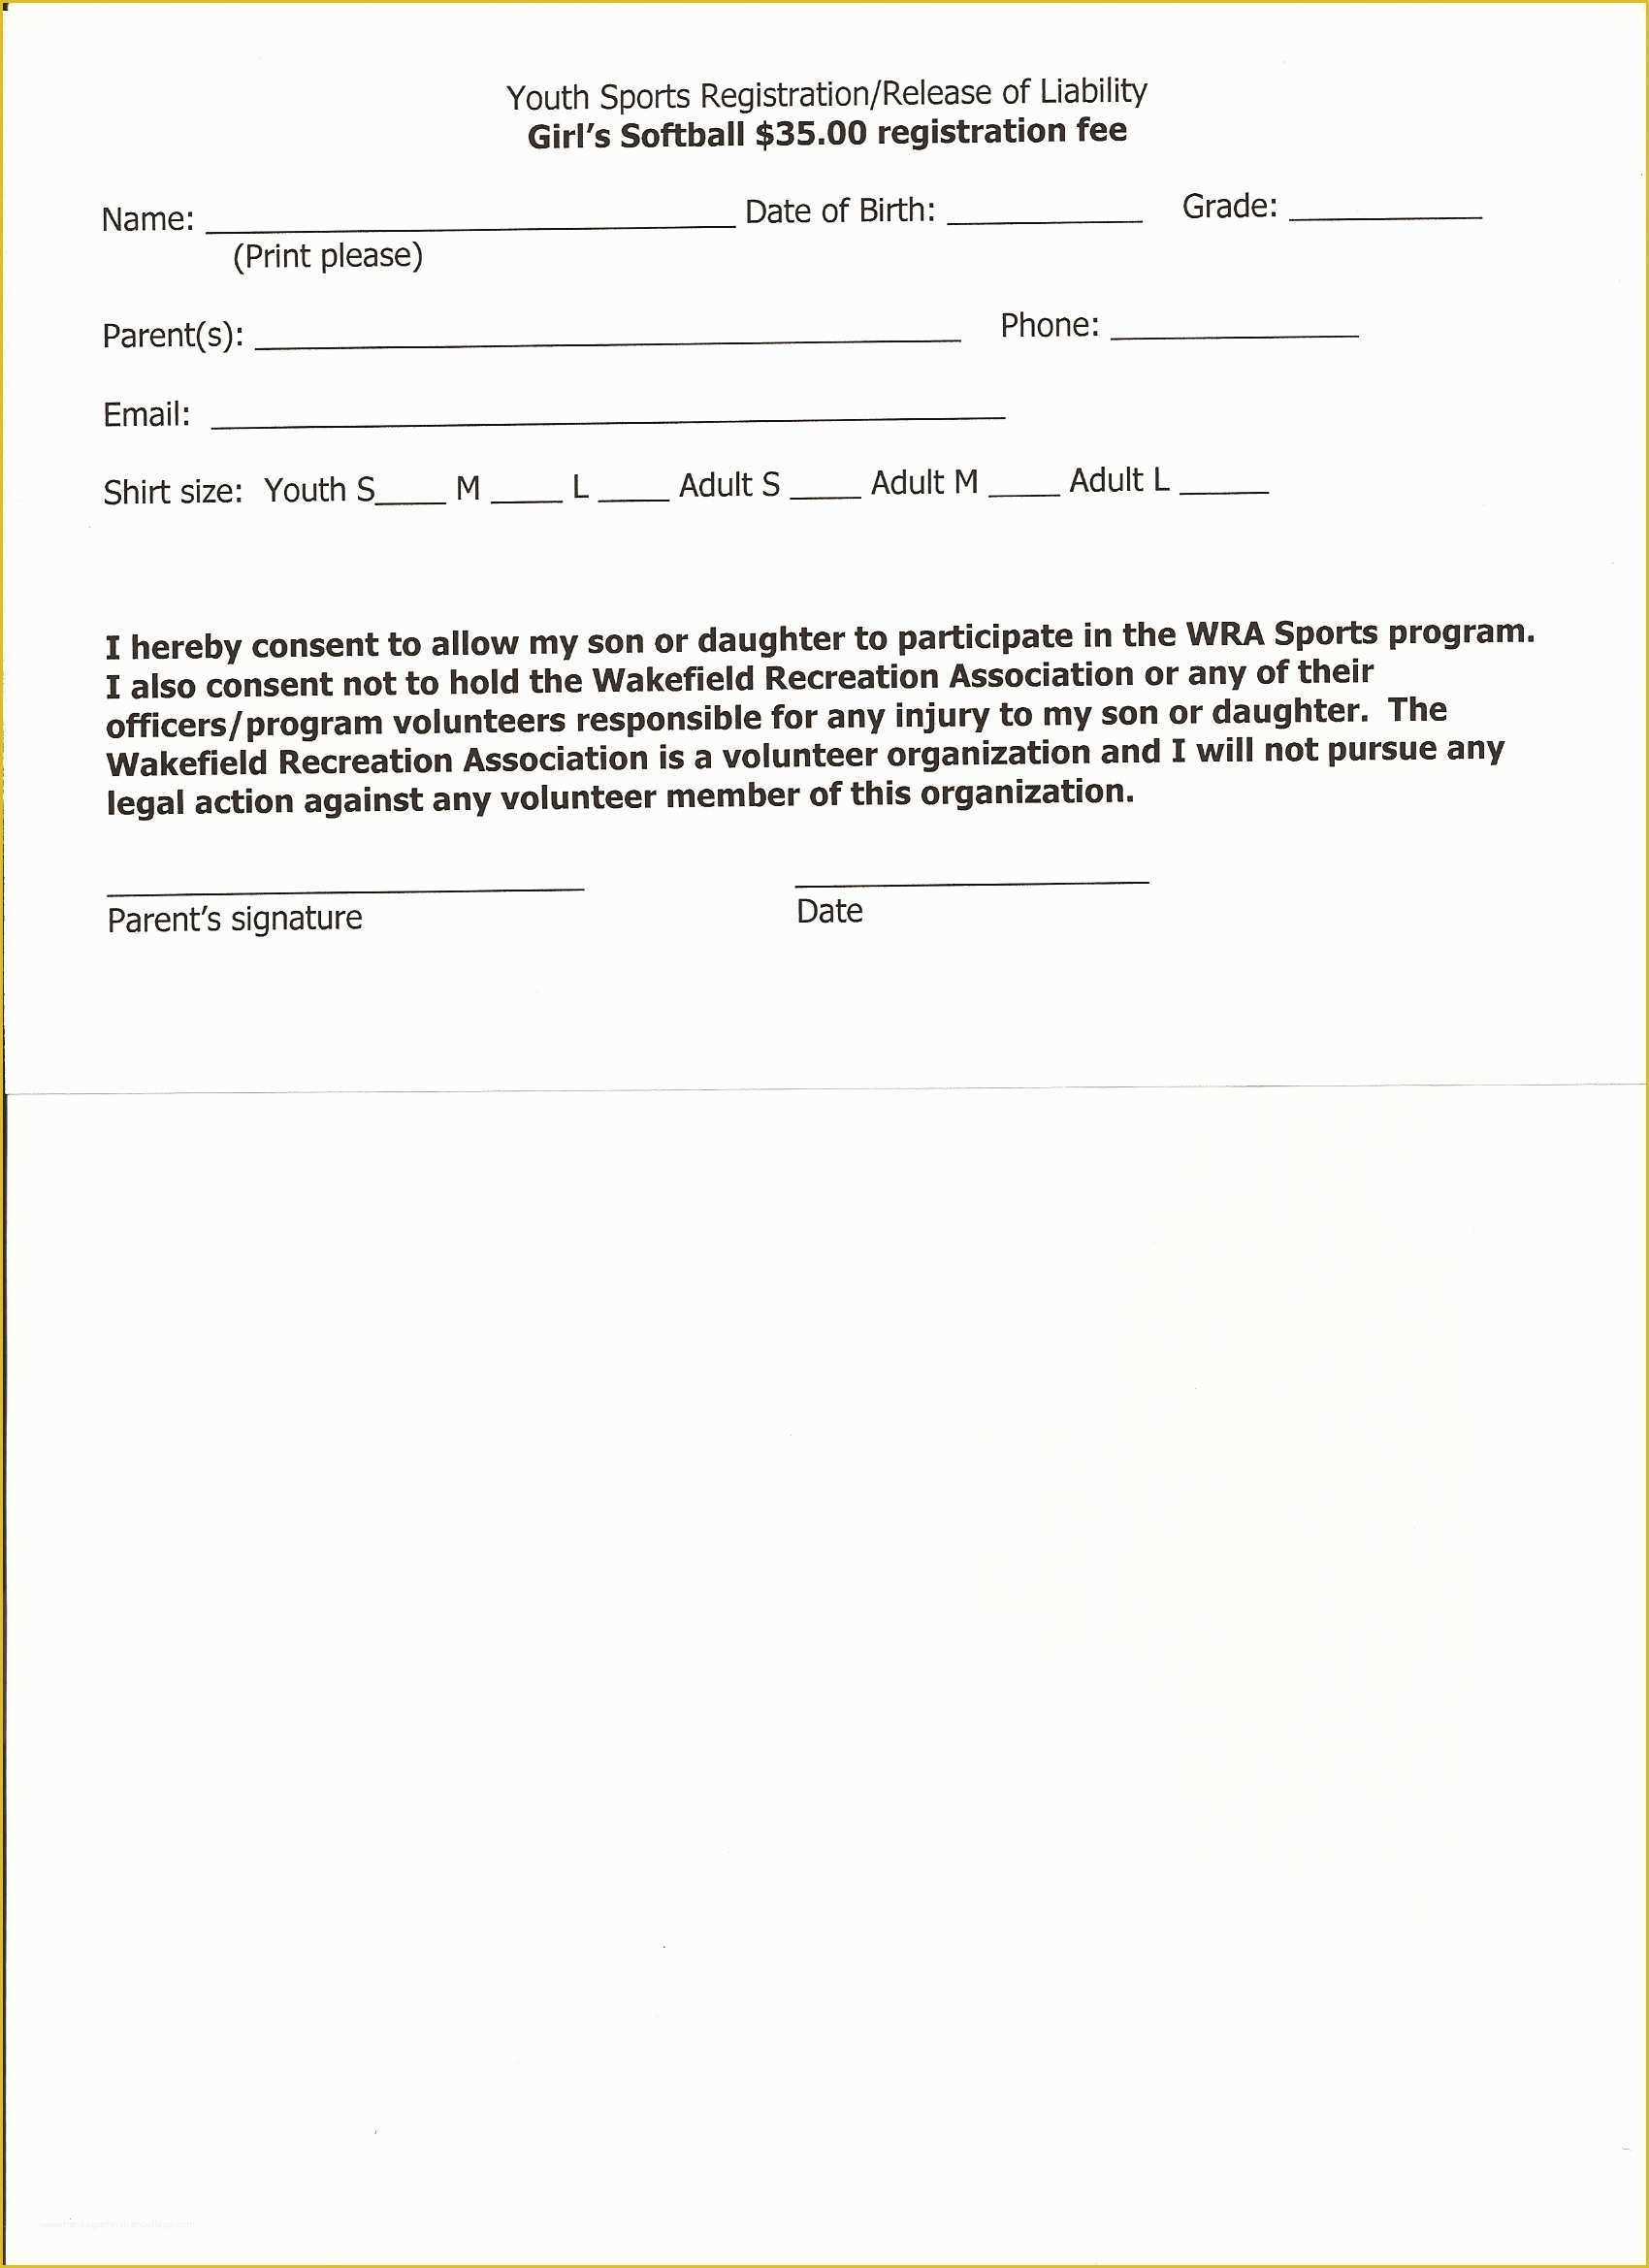 Free Liability Release form Template Of Liability Release form Template Free Printable Documents